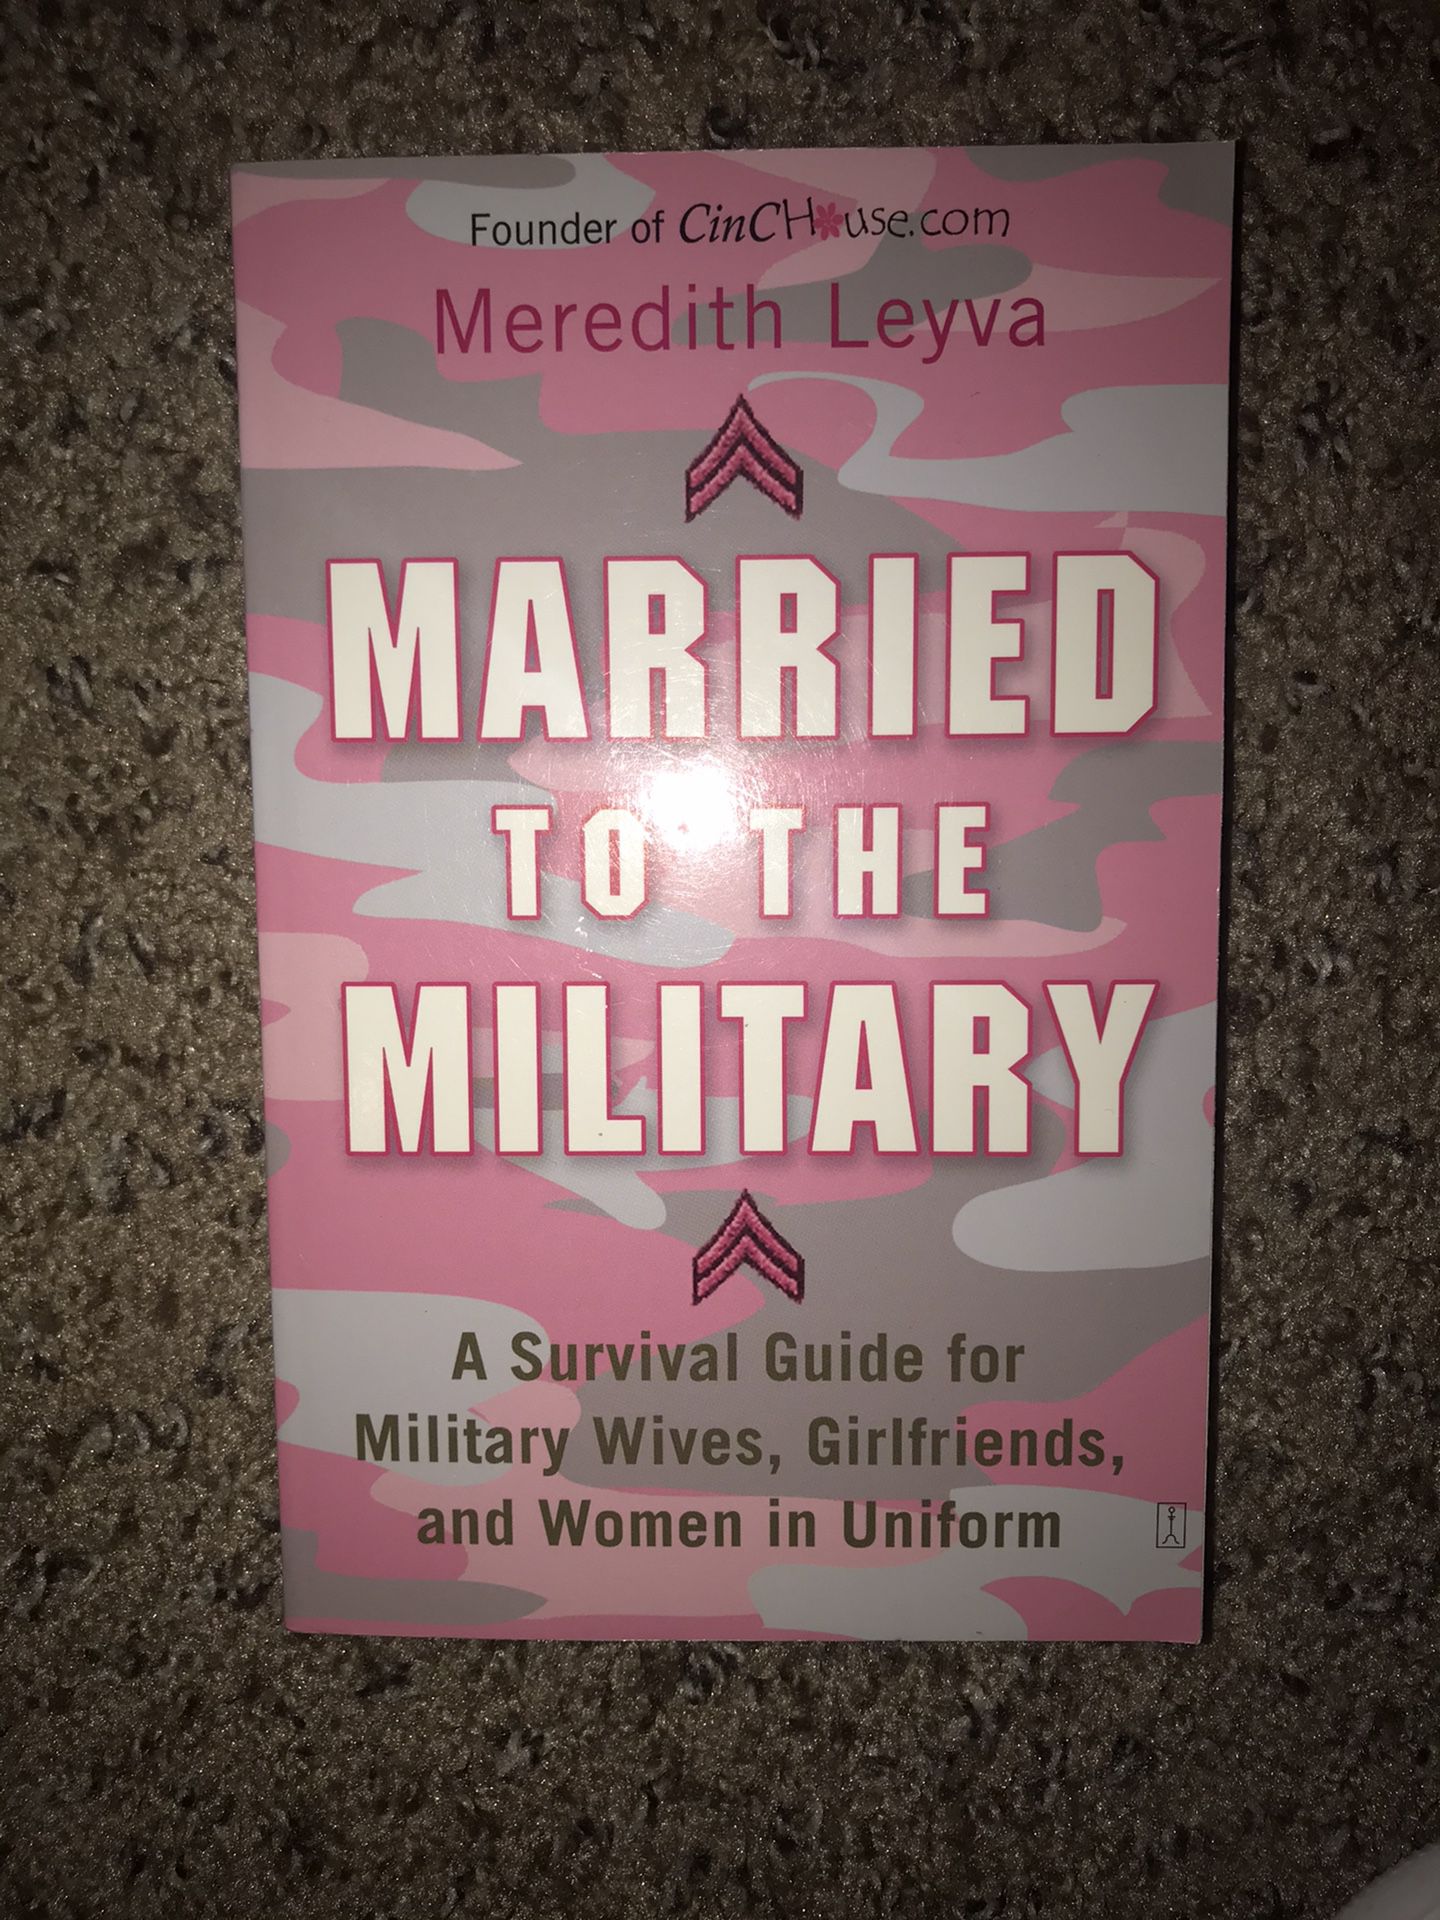 NEW Married to the Military by Meredith Leyva